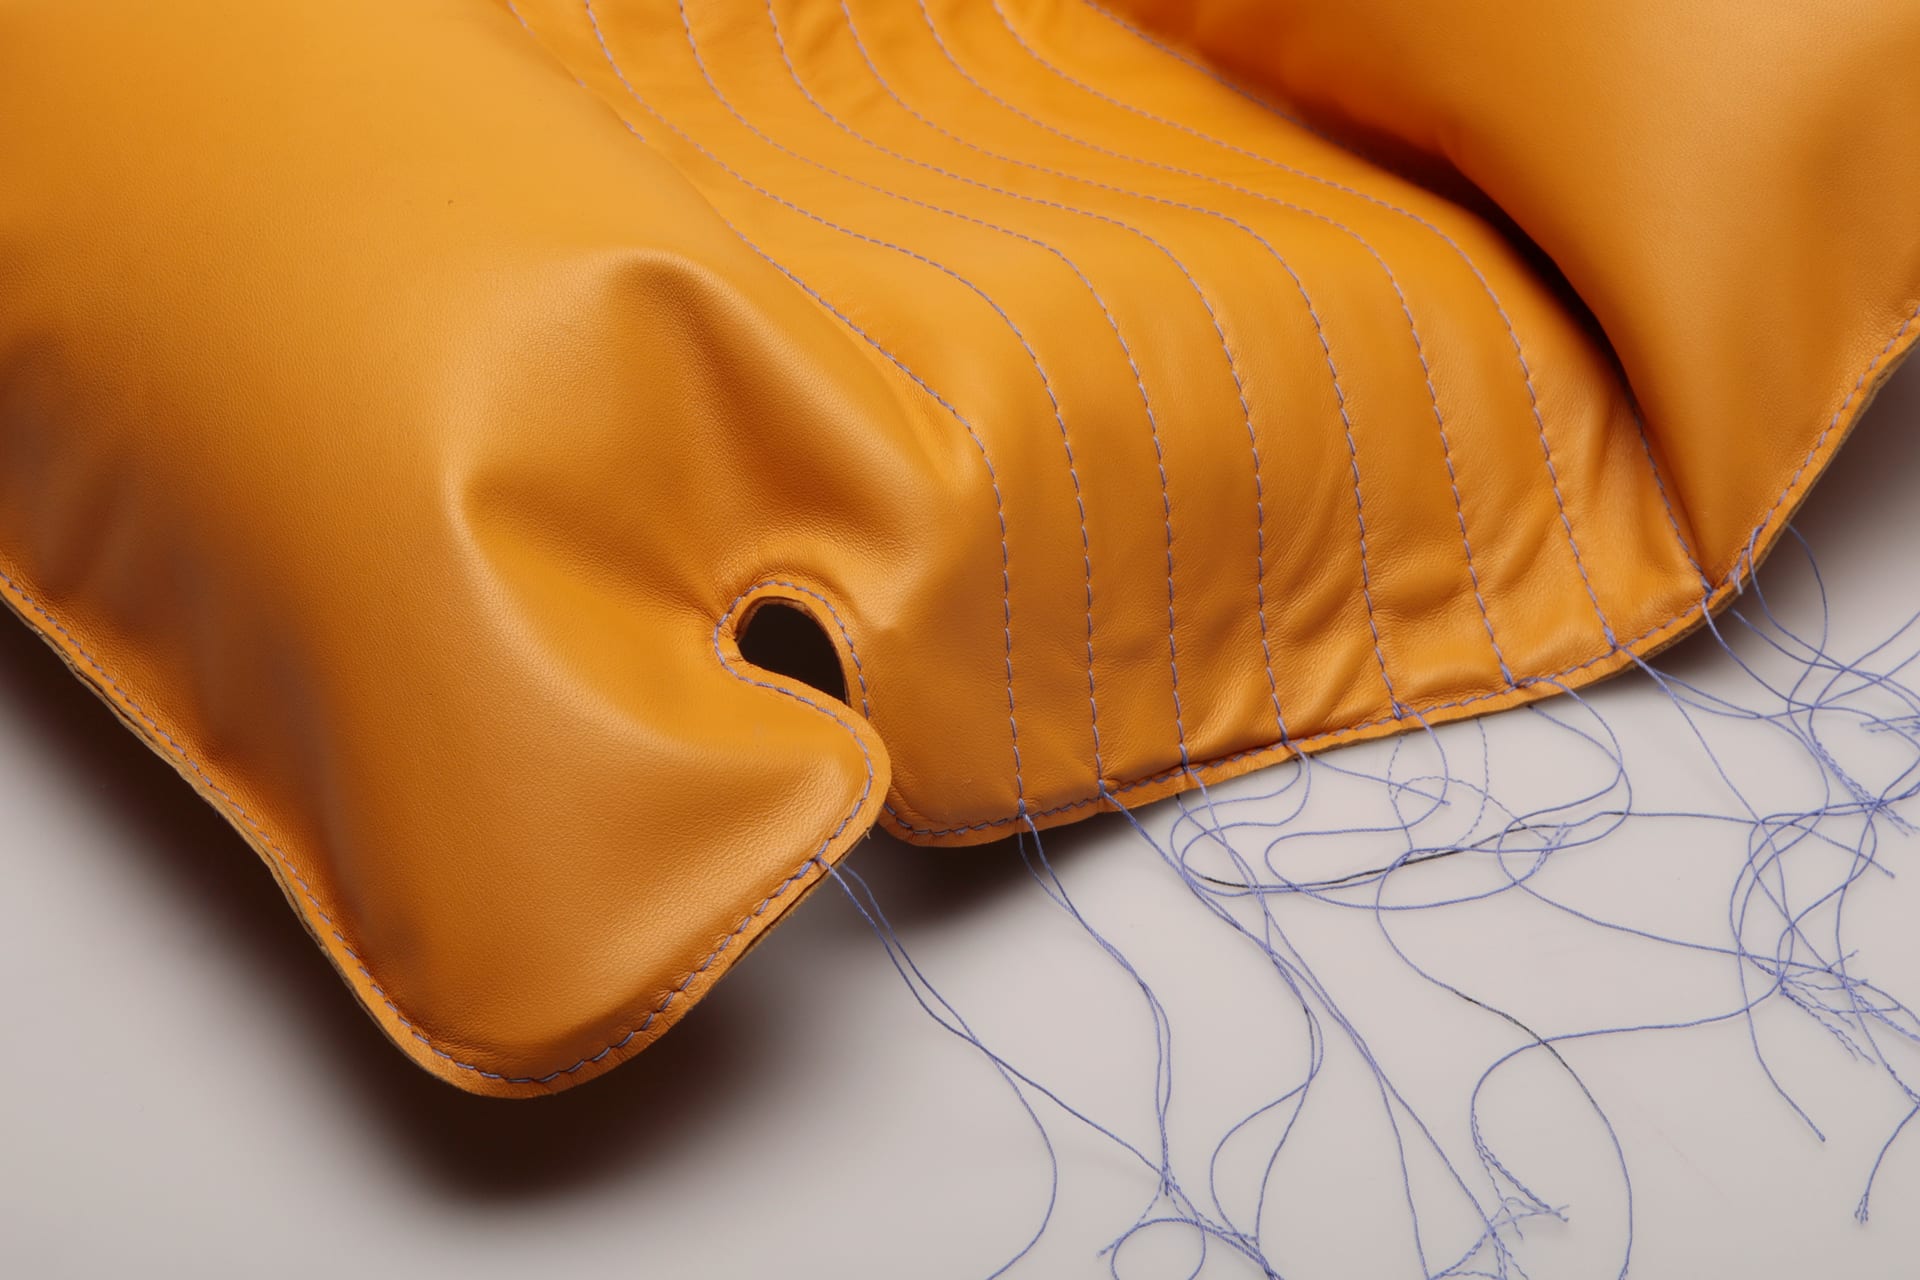 When paired with a material such as metal or leather, the value of the inflatable is elevated.